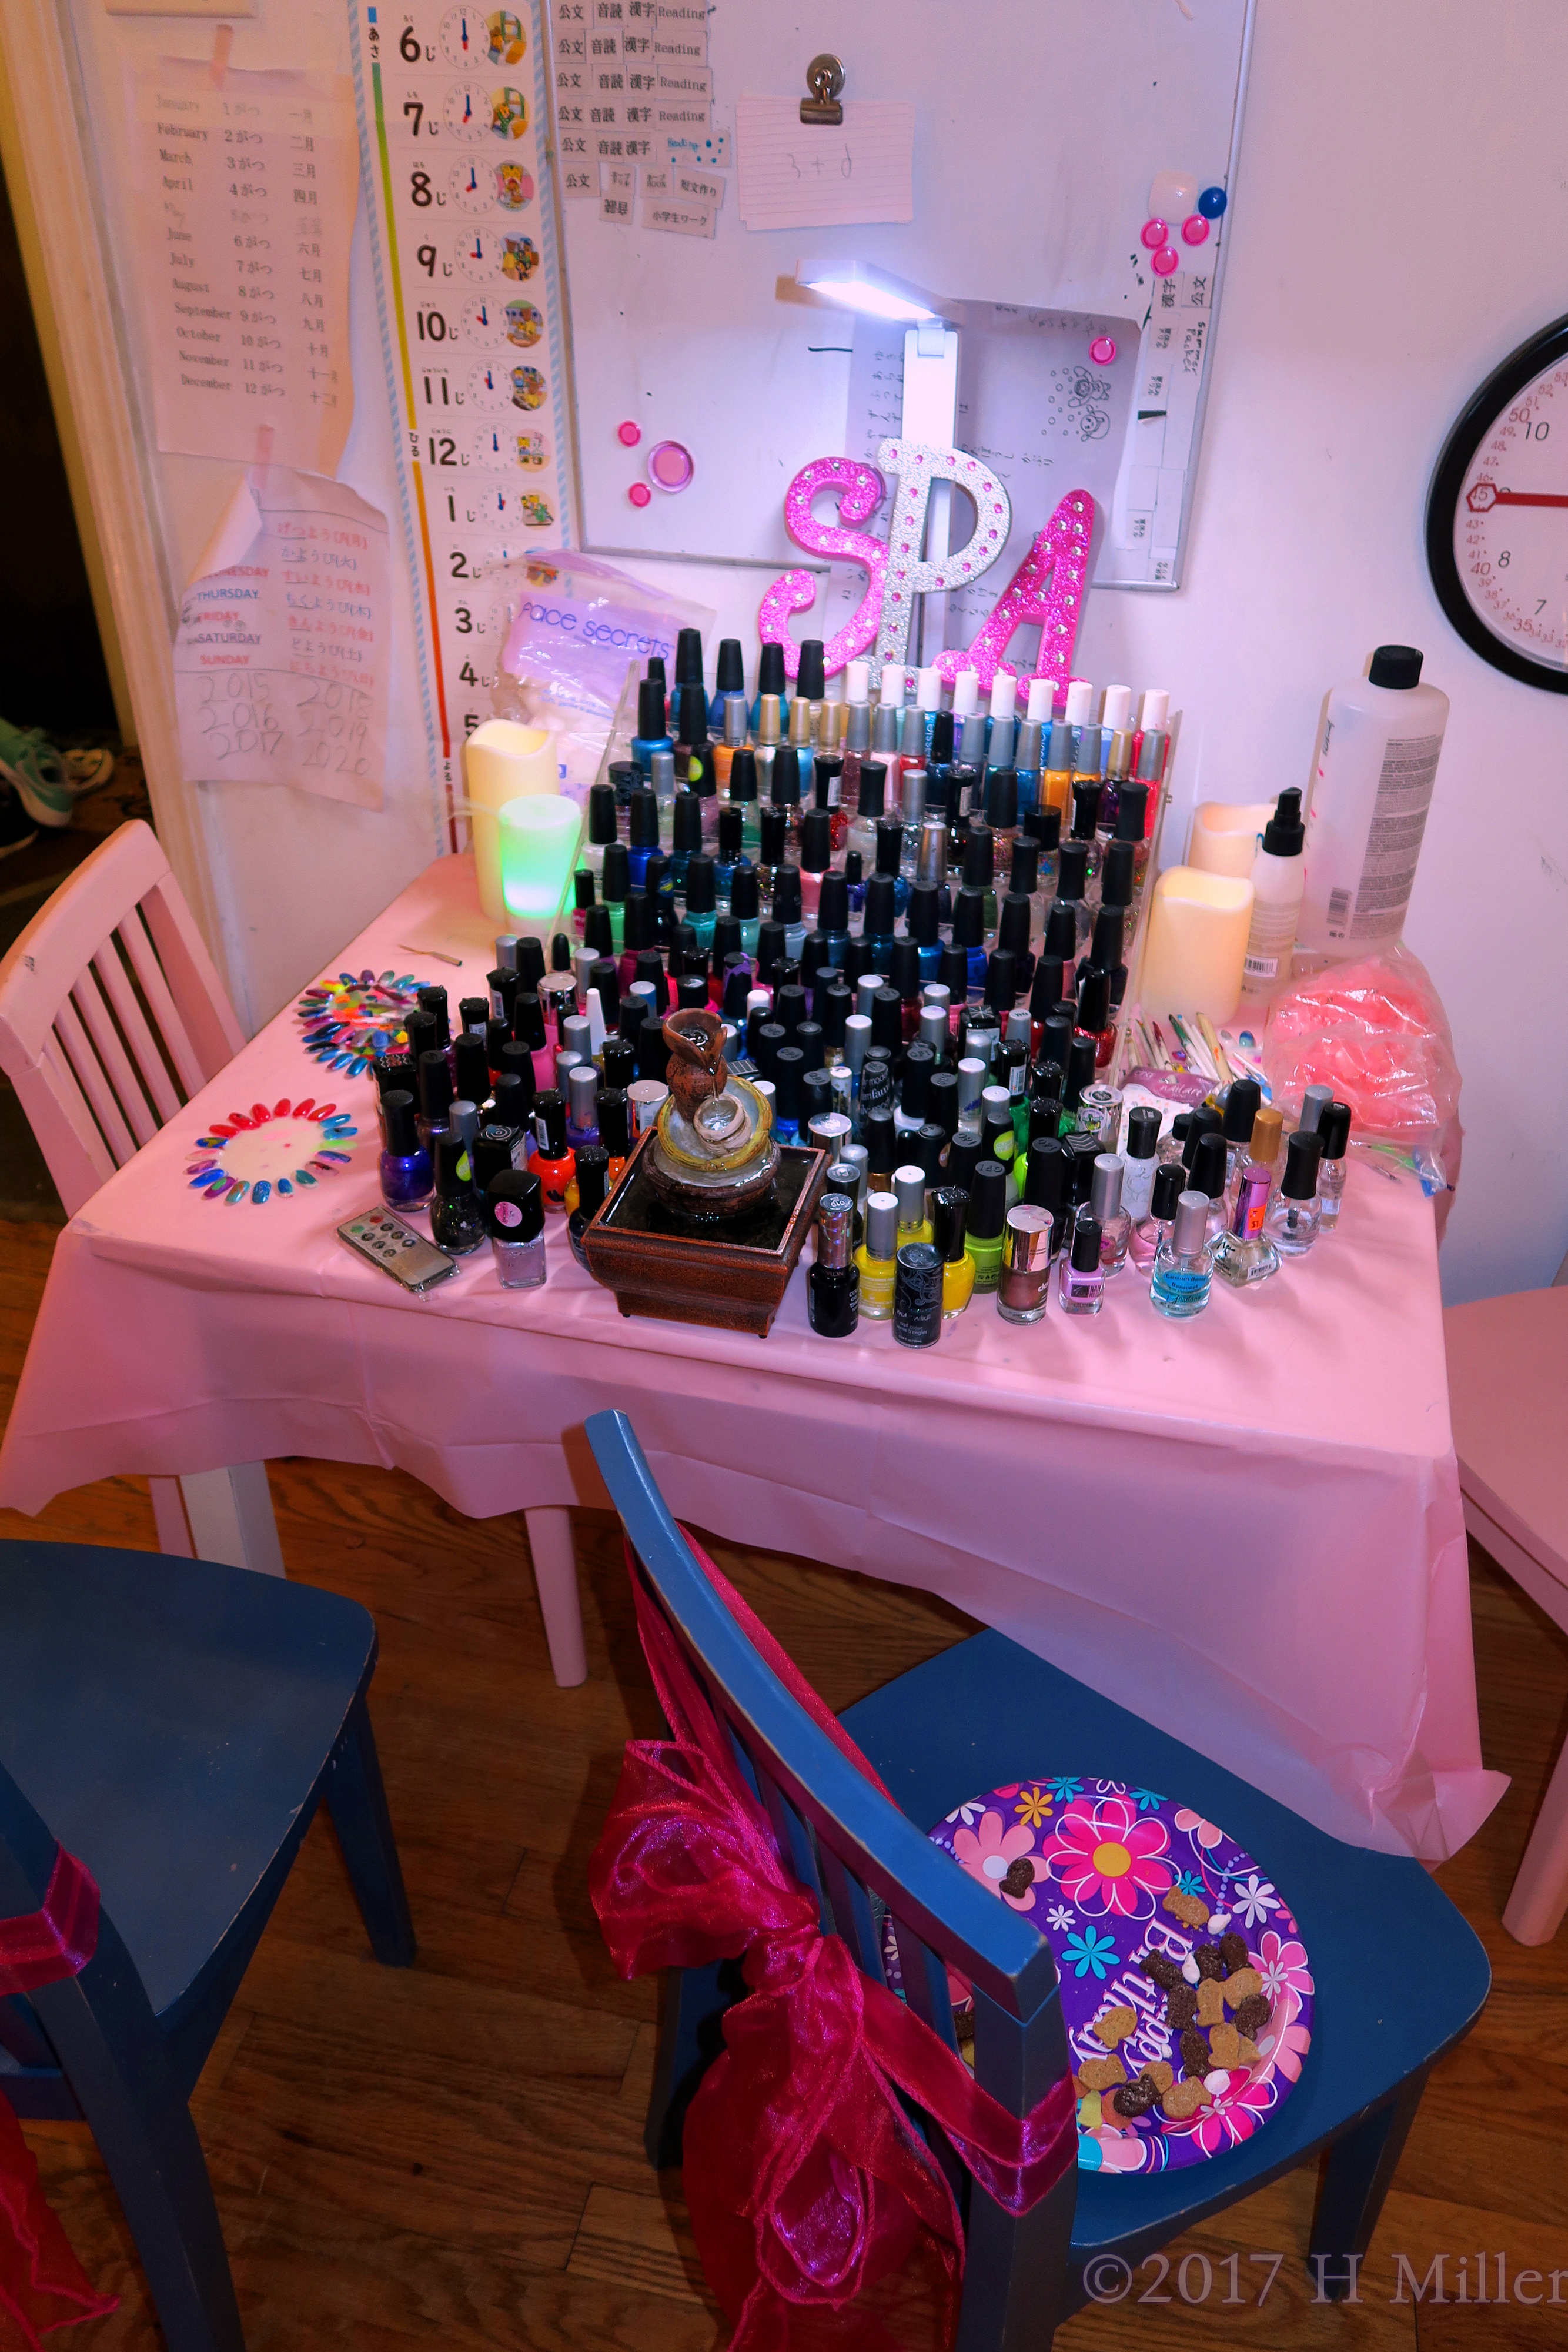 An Amazing Arrangement Of Various Nail Colors And Artificial Nails For Kids Mani. 